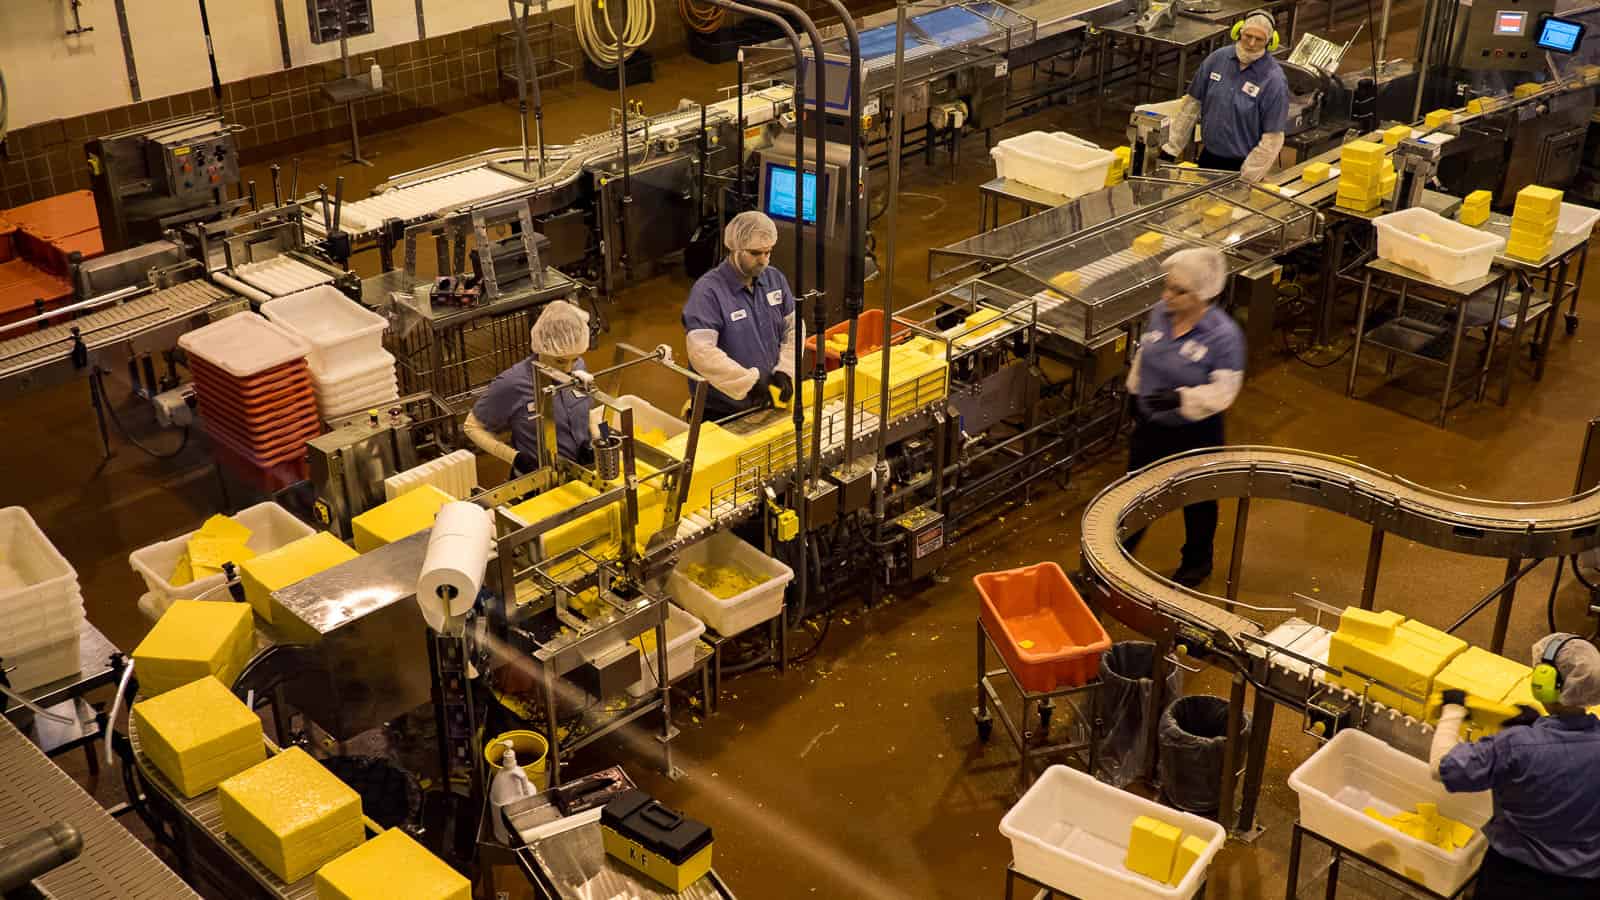 Tillamook: Let Me Take You Inside a Cheese Factory